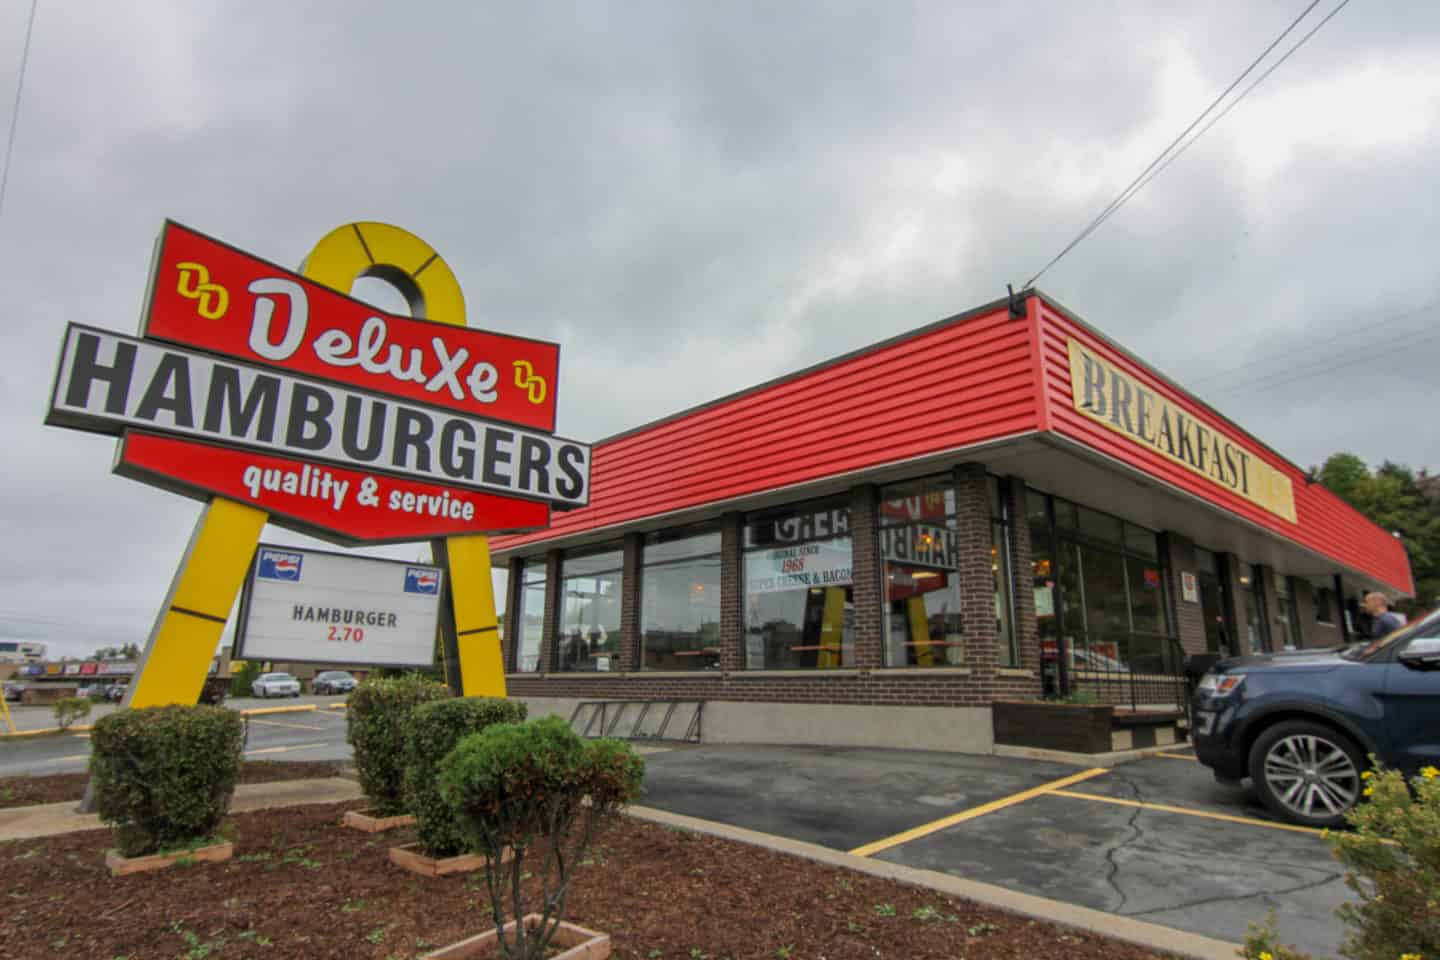 Food at Deluxe Hamburgers is one of the things to do in Sudbury